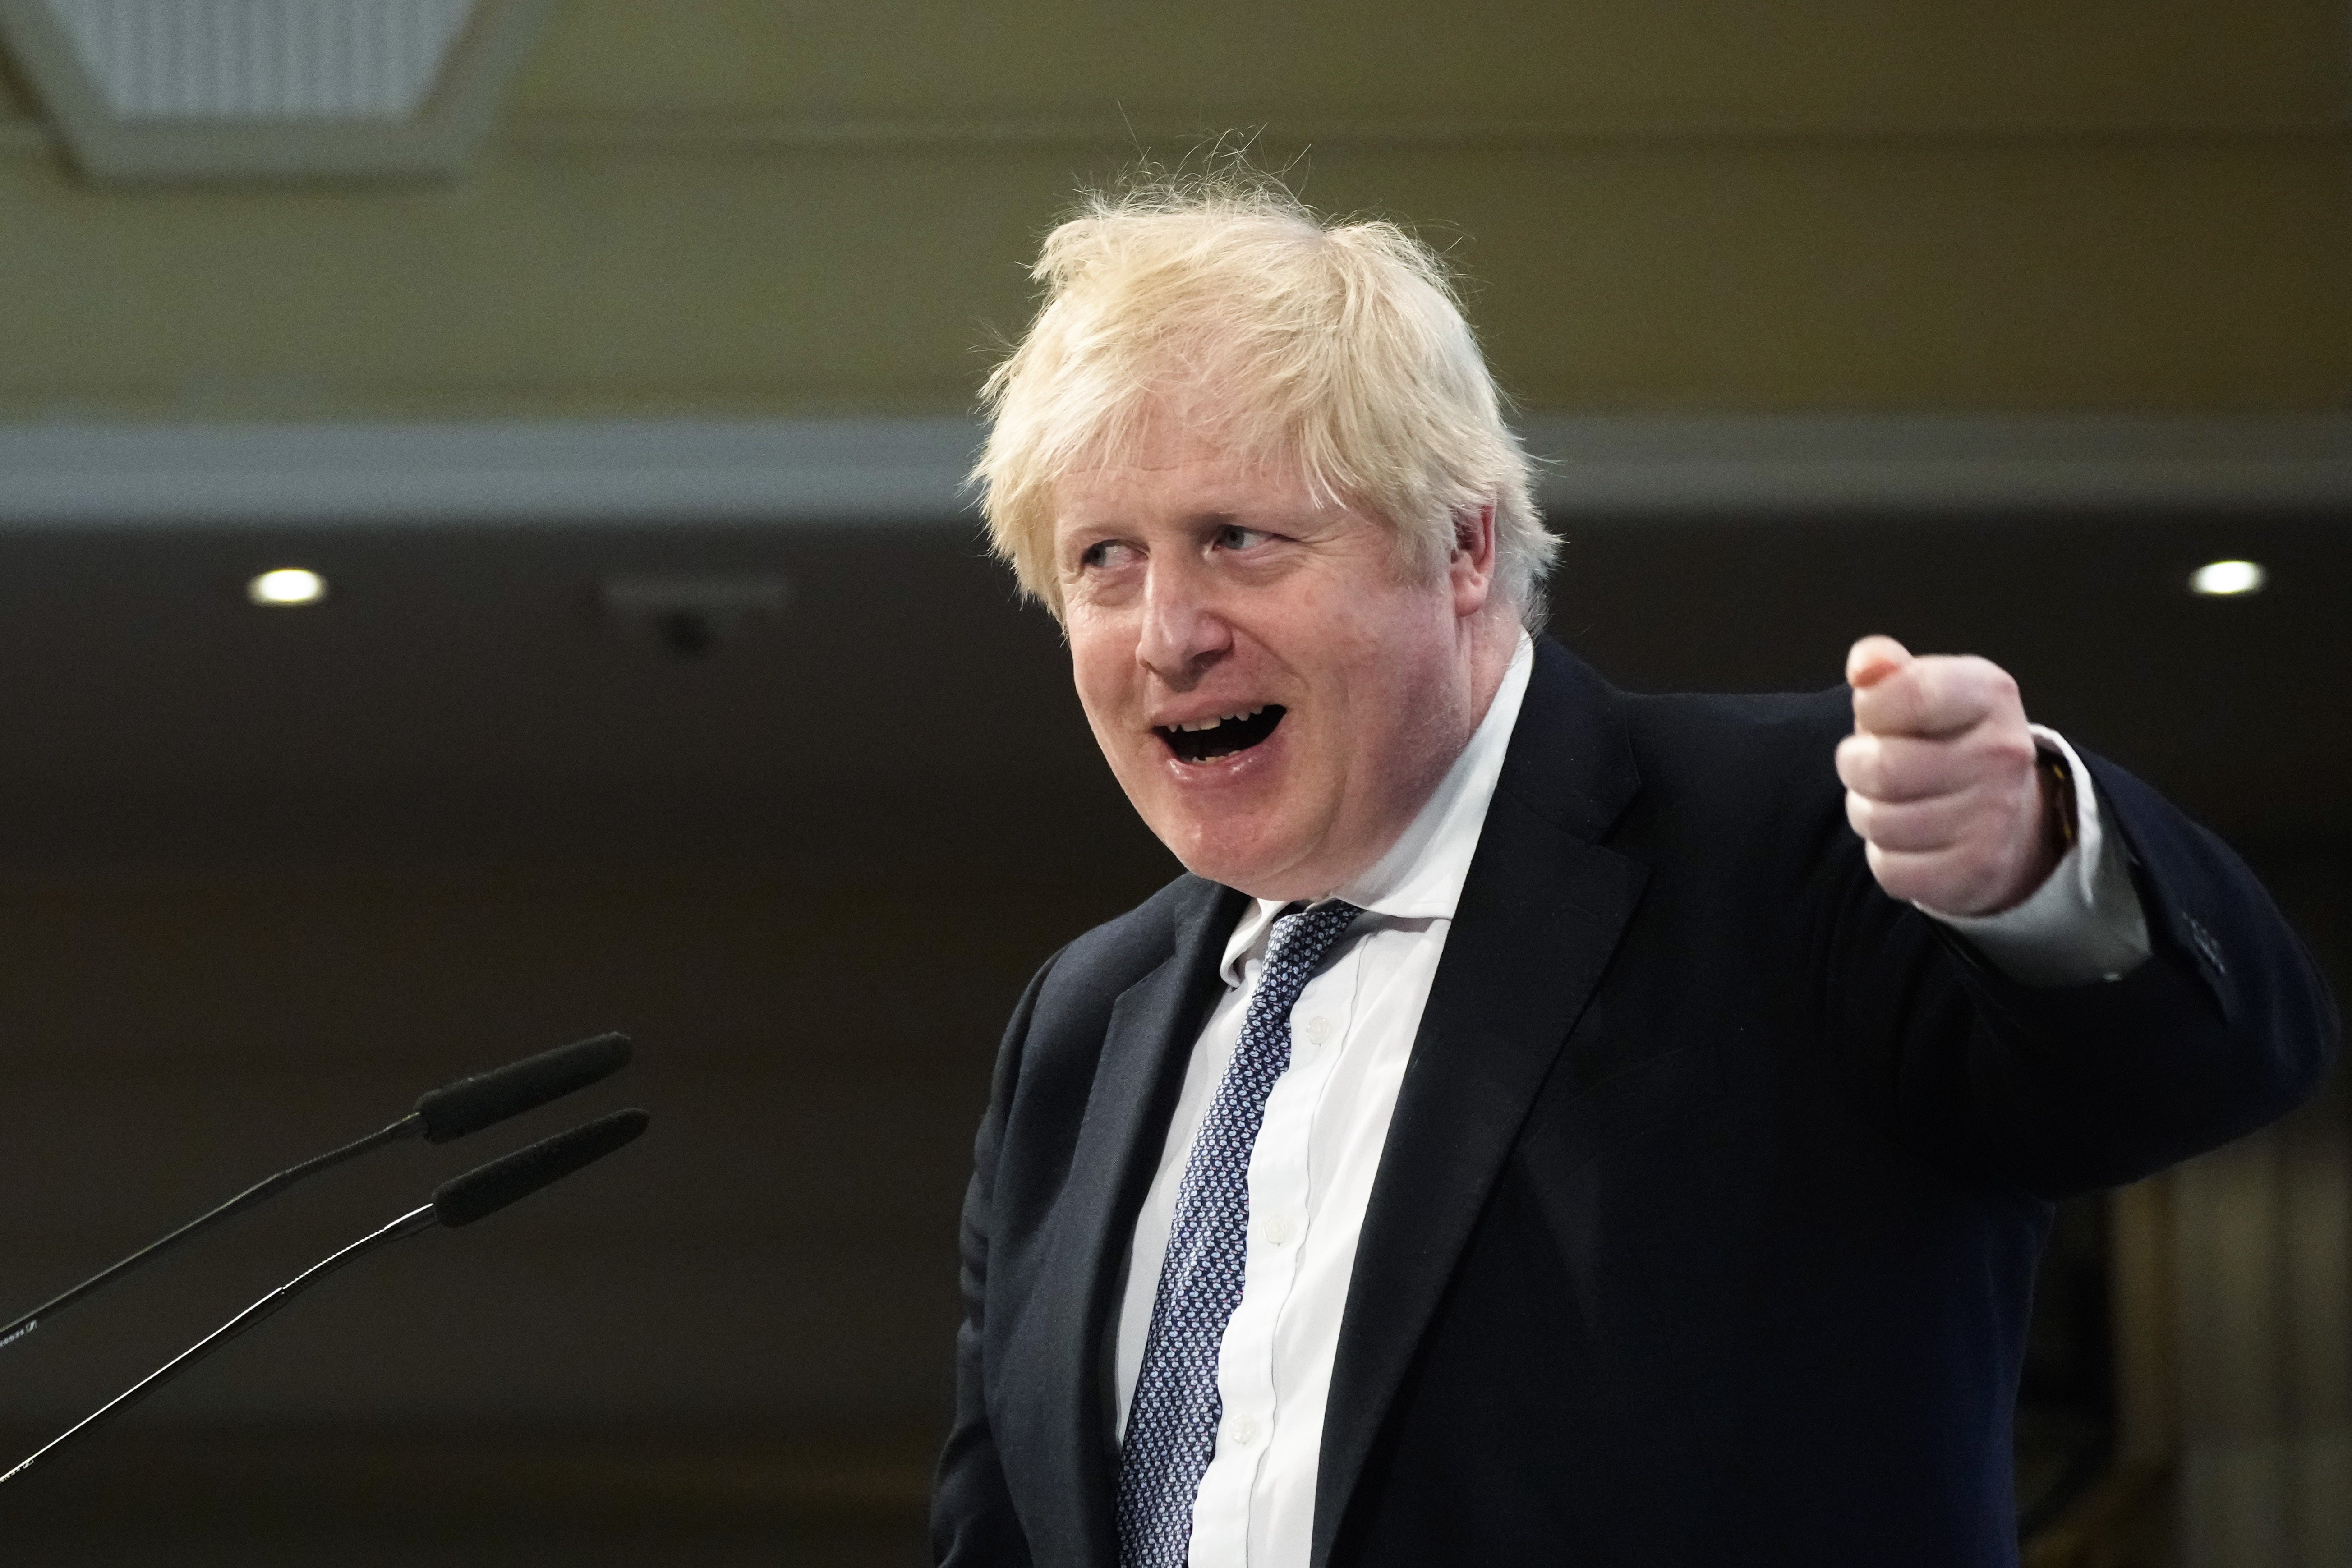 Boris Johnson refused to commit to resigning if he was found to have broken the law (Matt Dunham/PA)